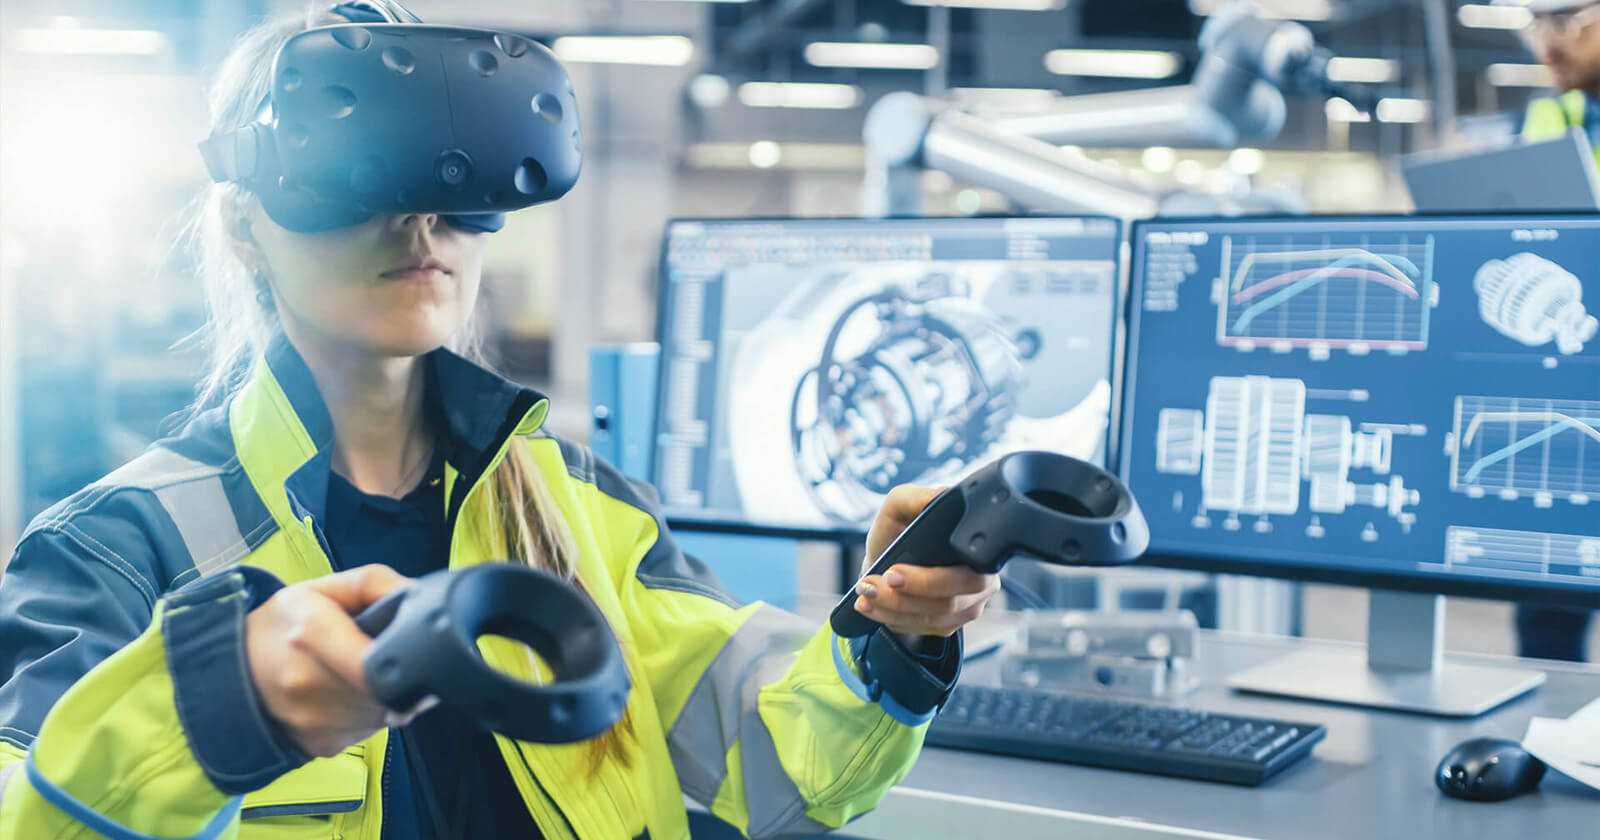 Virtual Reality Simulations to Elevate Training 5 Industries That Can Benefit - Visartech Blog